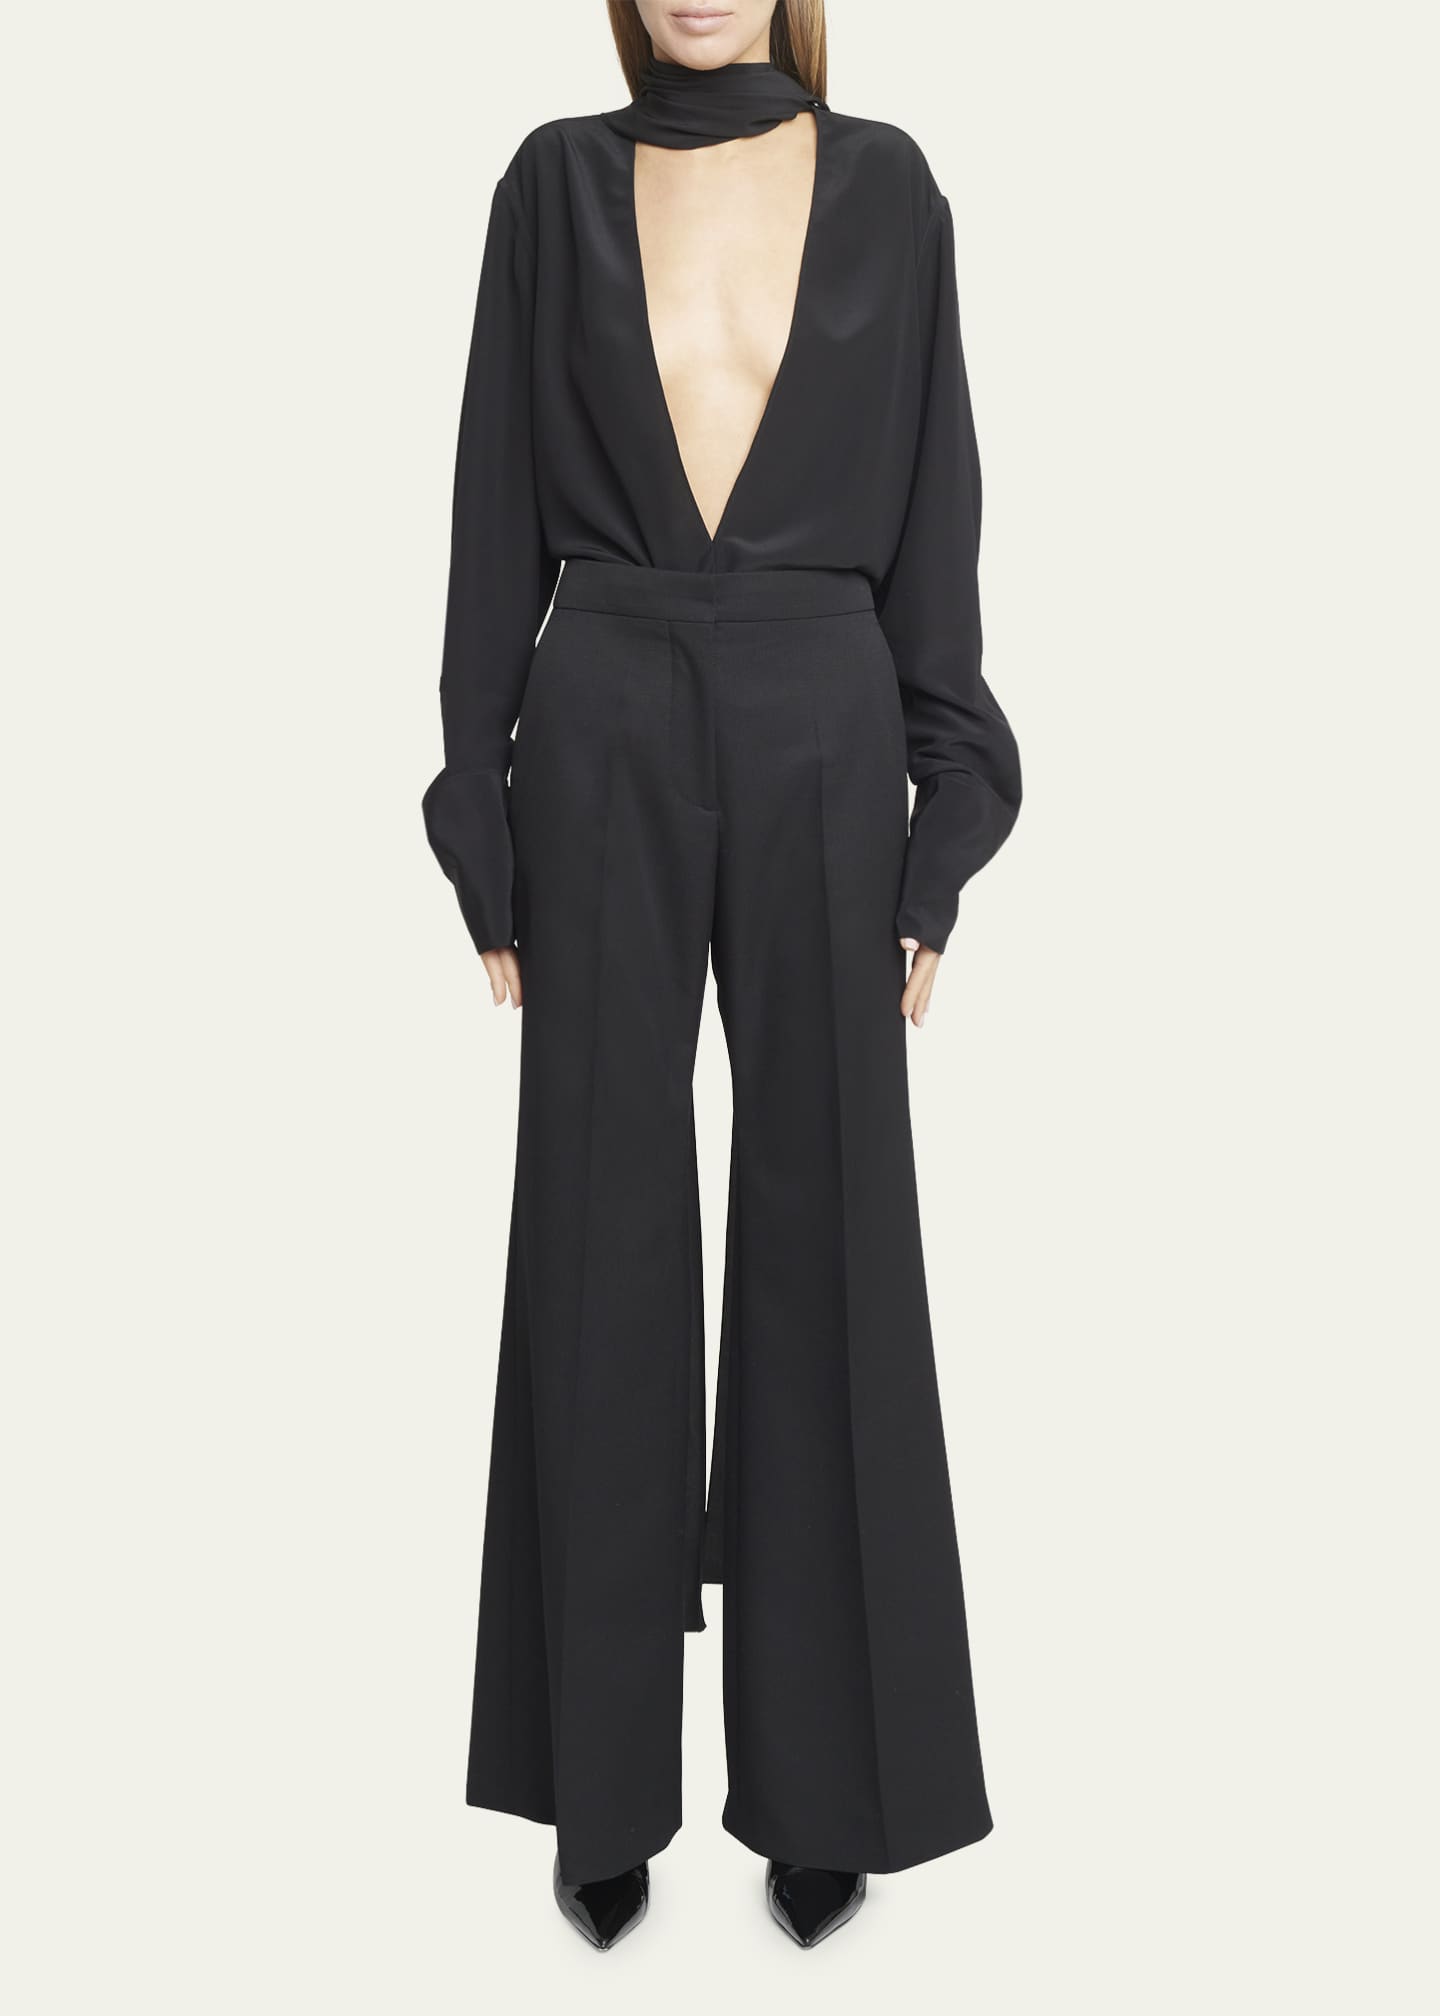 Givenchy Flare Suiting Trousers - Bergdorf Goodman